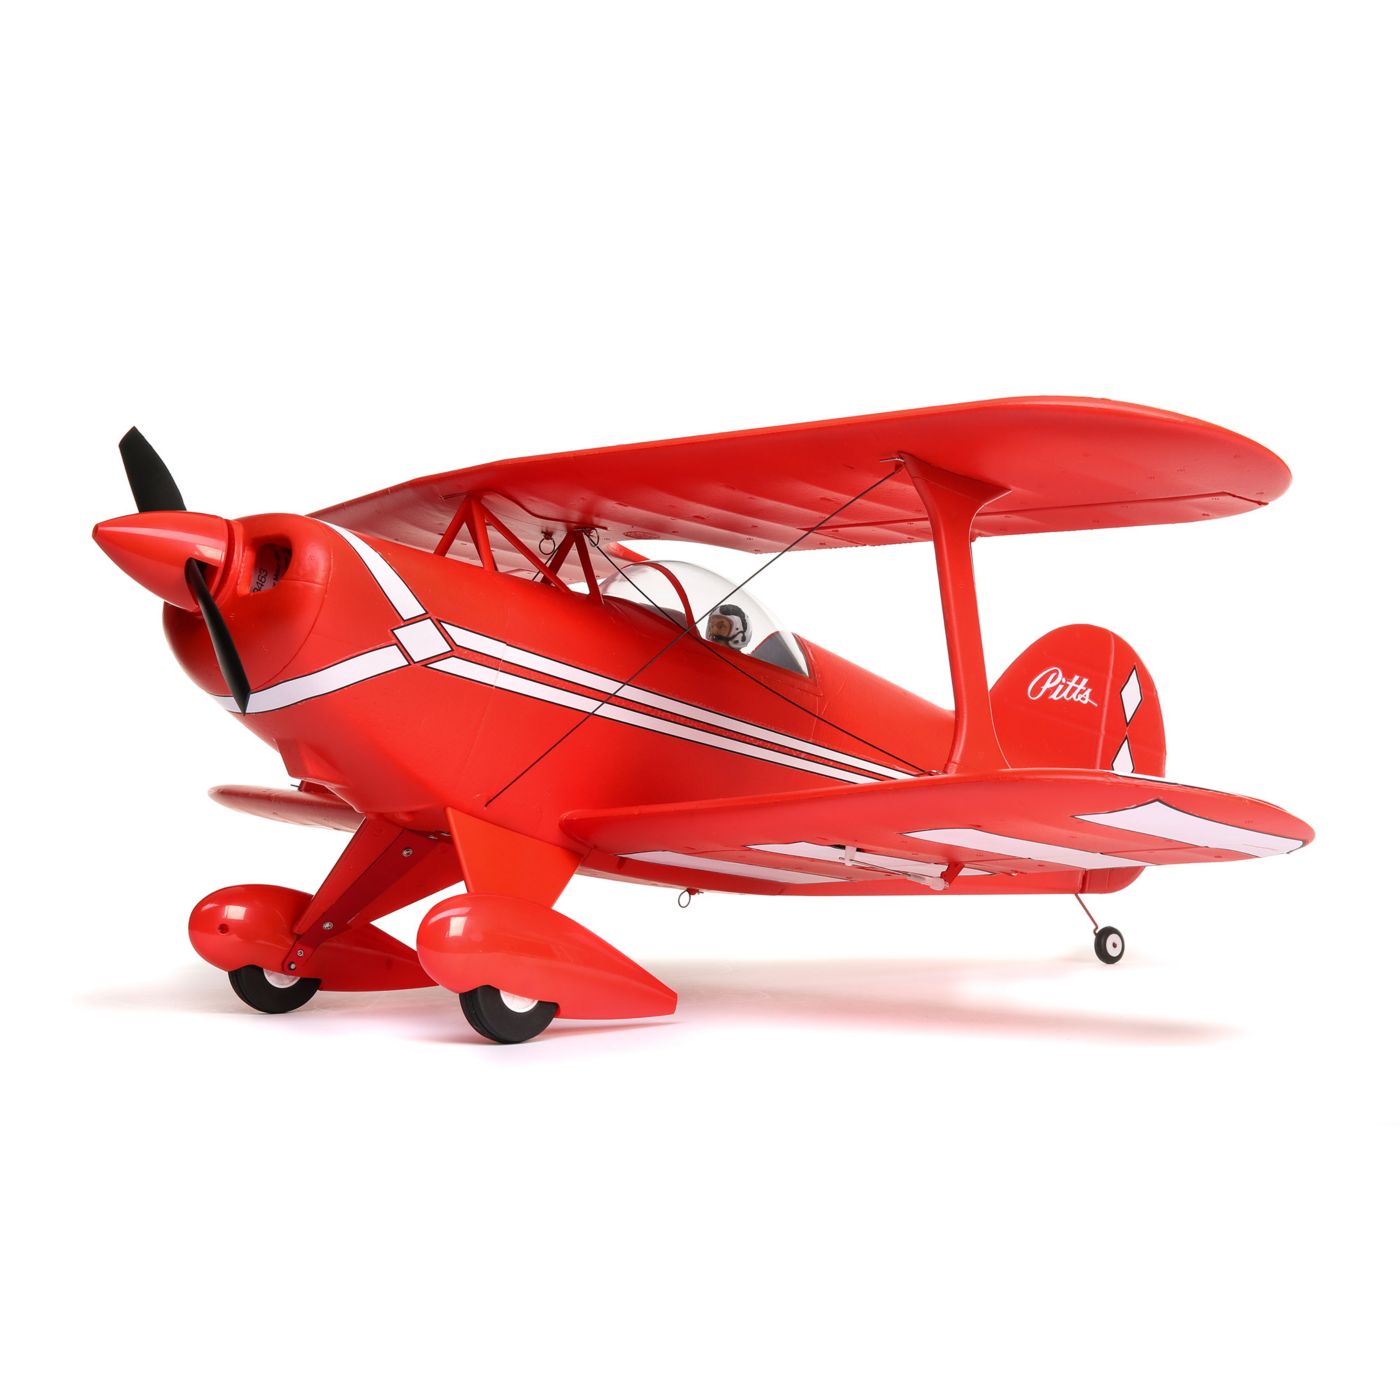 E-flite Pitts S-1S BNF Basic Safe As3x 02